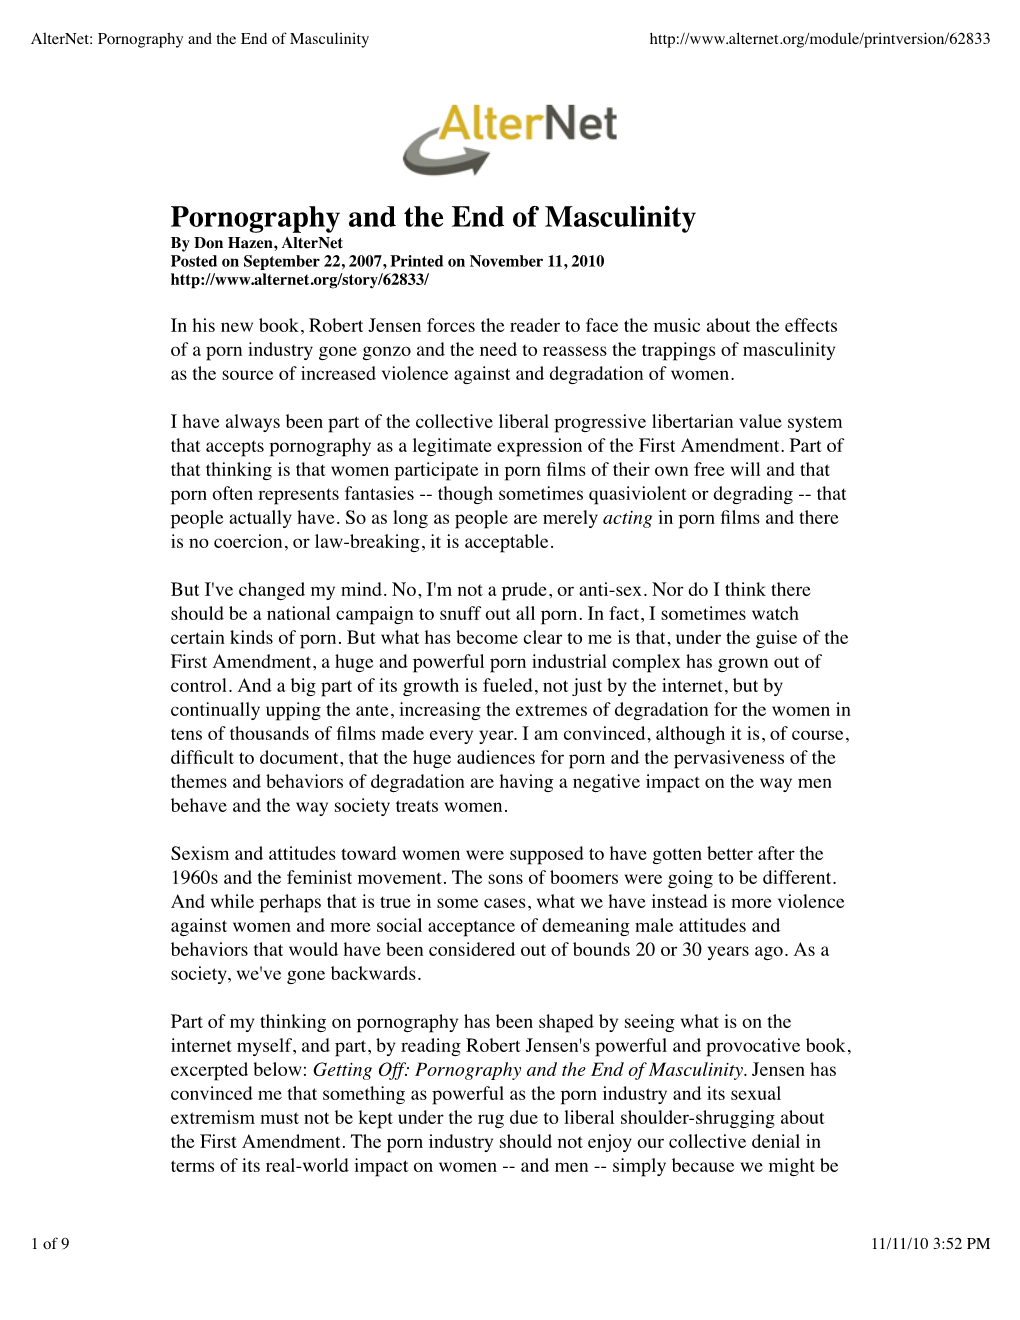 Pornography and the End of Masculinity